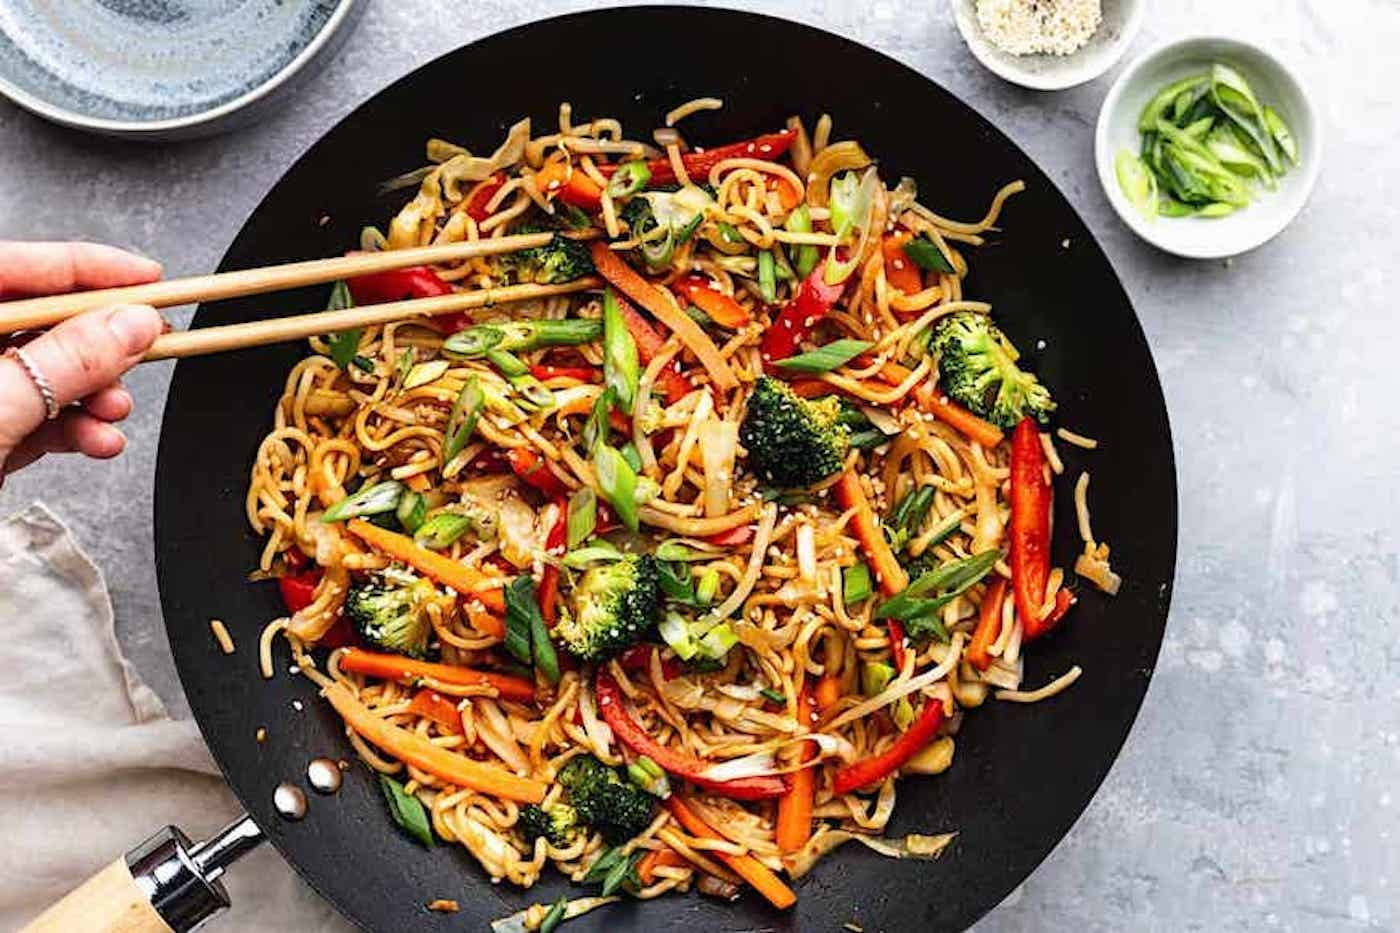 7 Vegetarian Chinese Food Recipes To Make at Home - Cup coffeeco